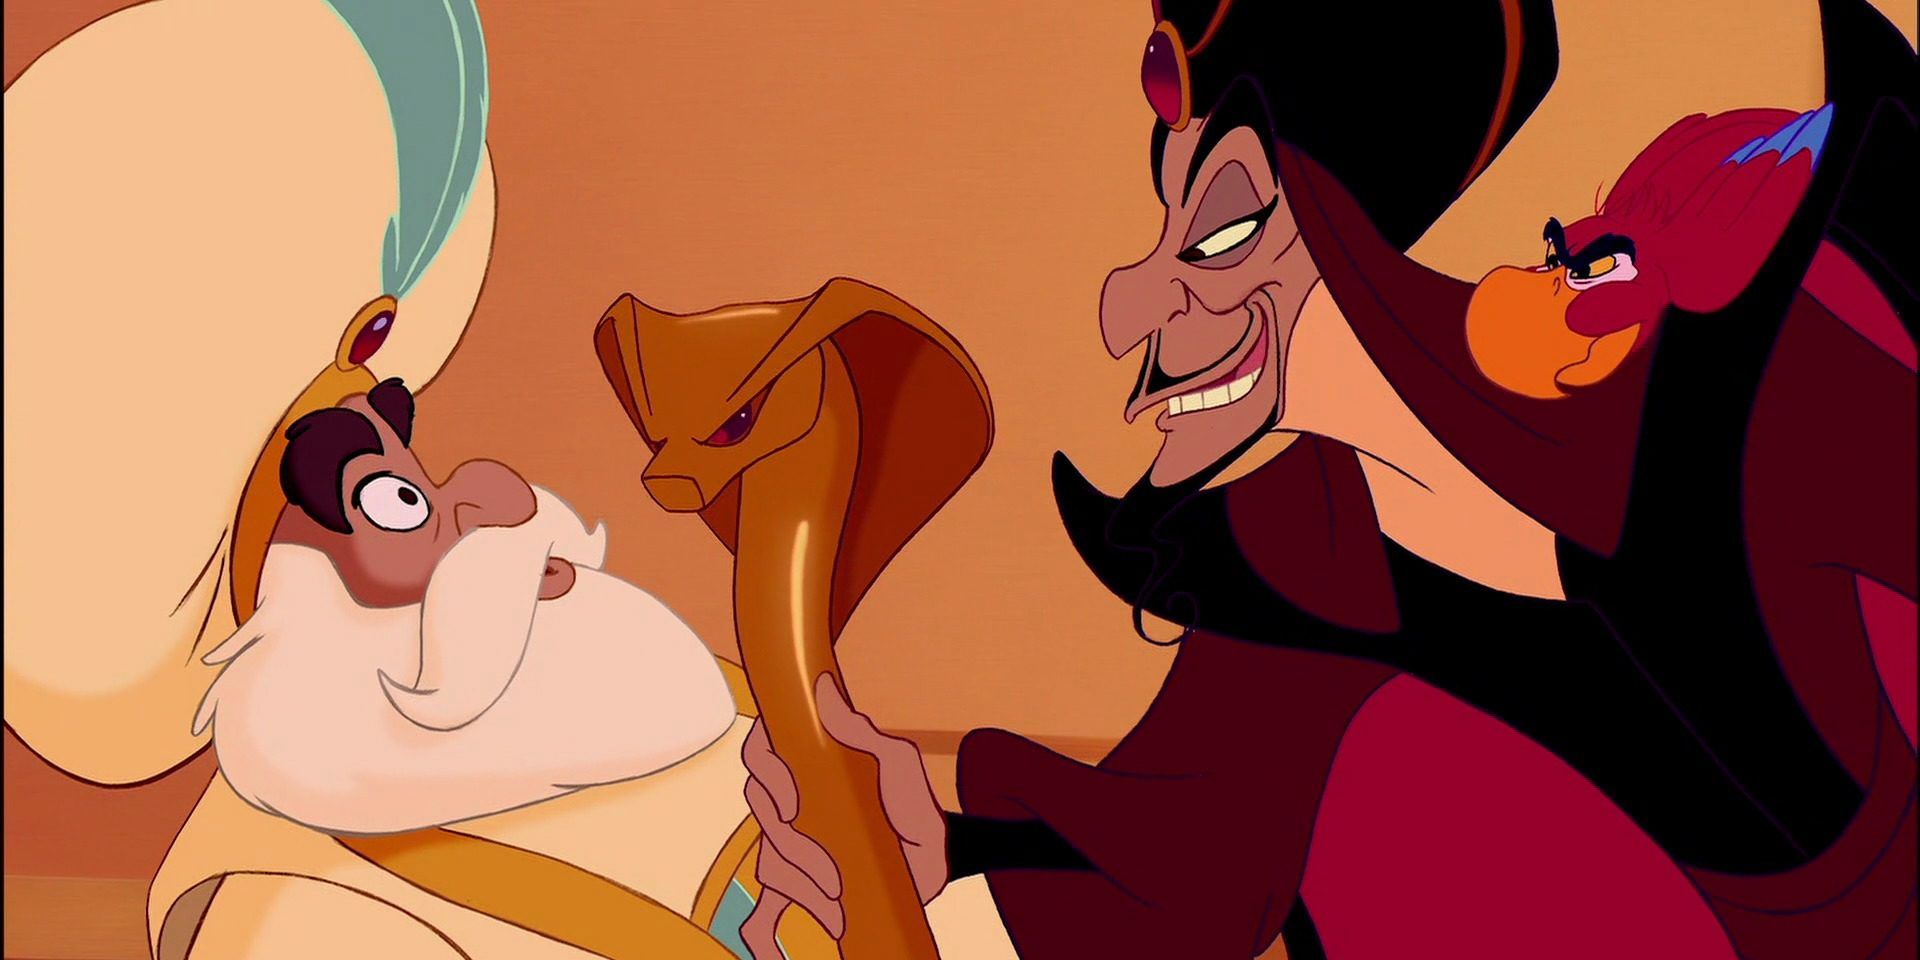 Jafar and the Sultan from Disney's Aladdin